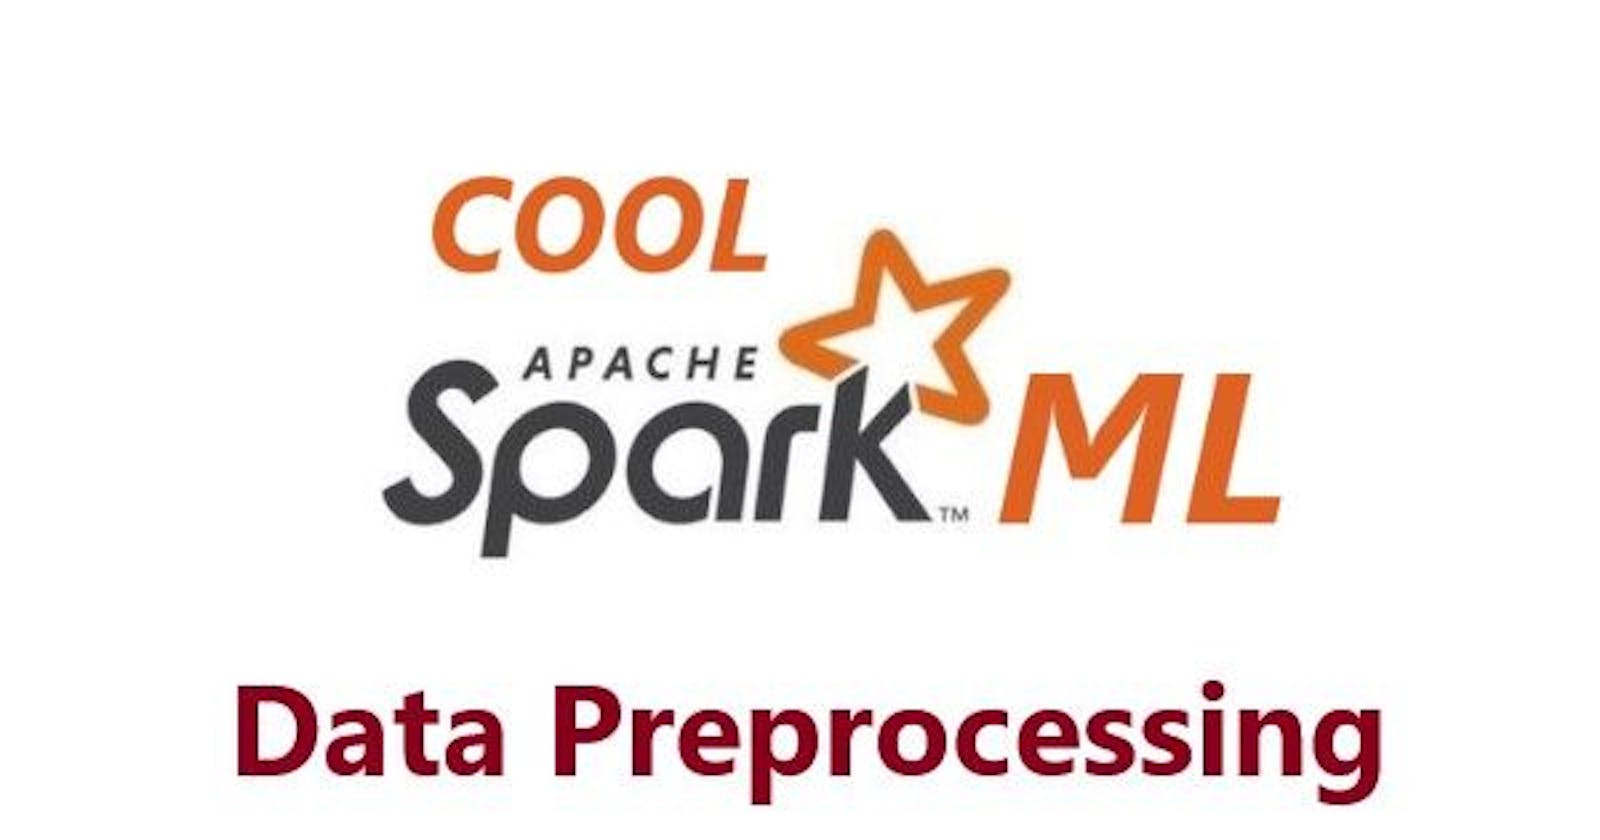 Cool Spark ML - Part 2: Preprocessing of Data